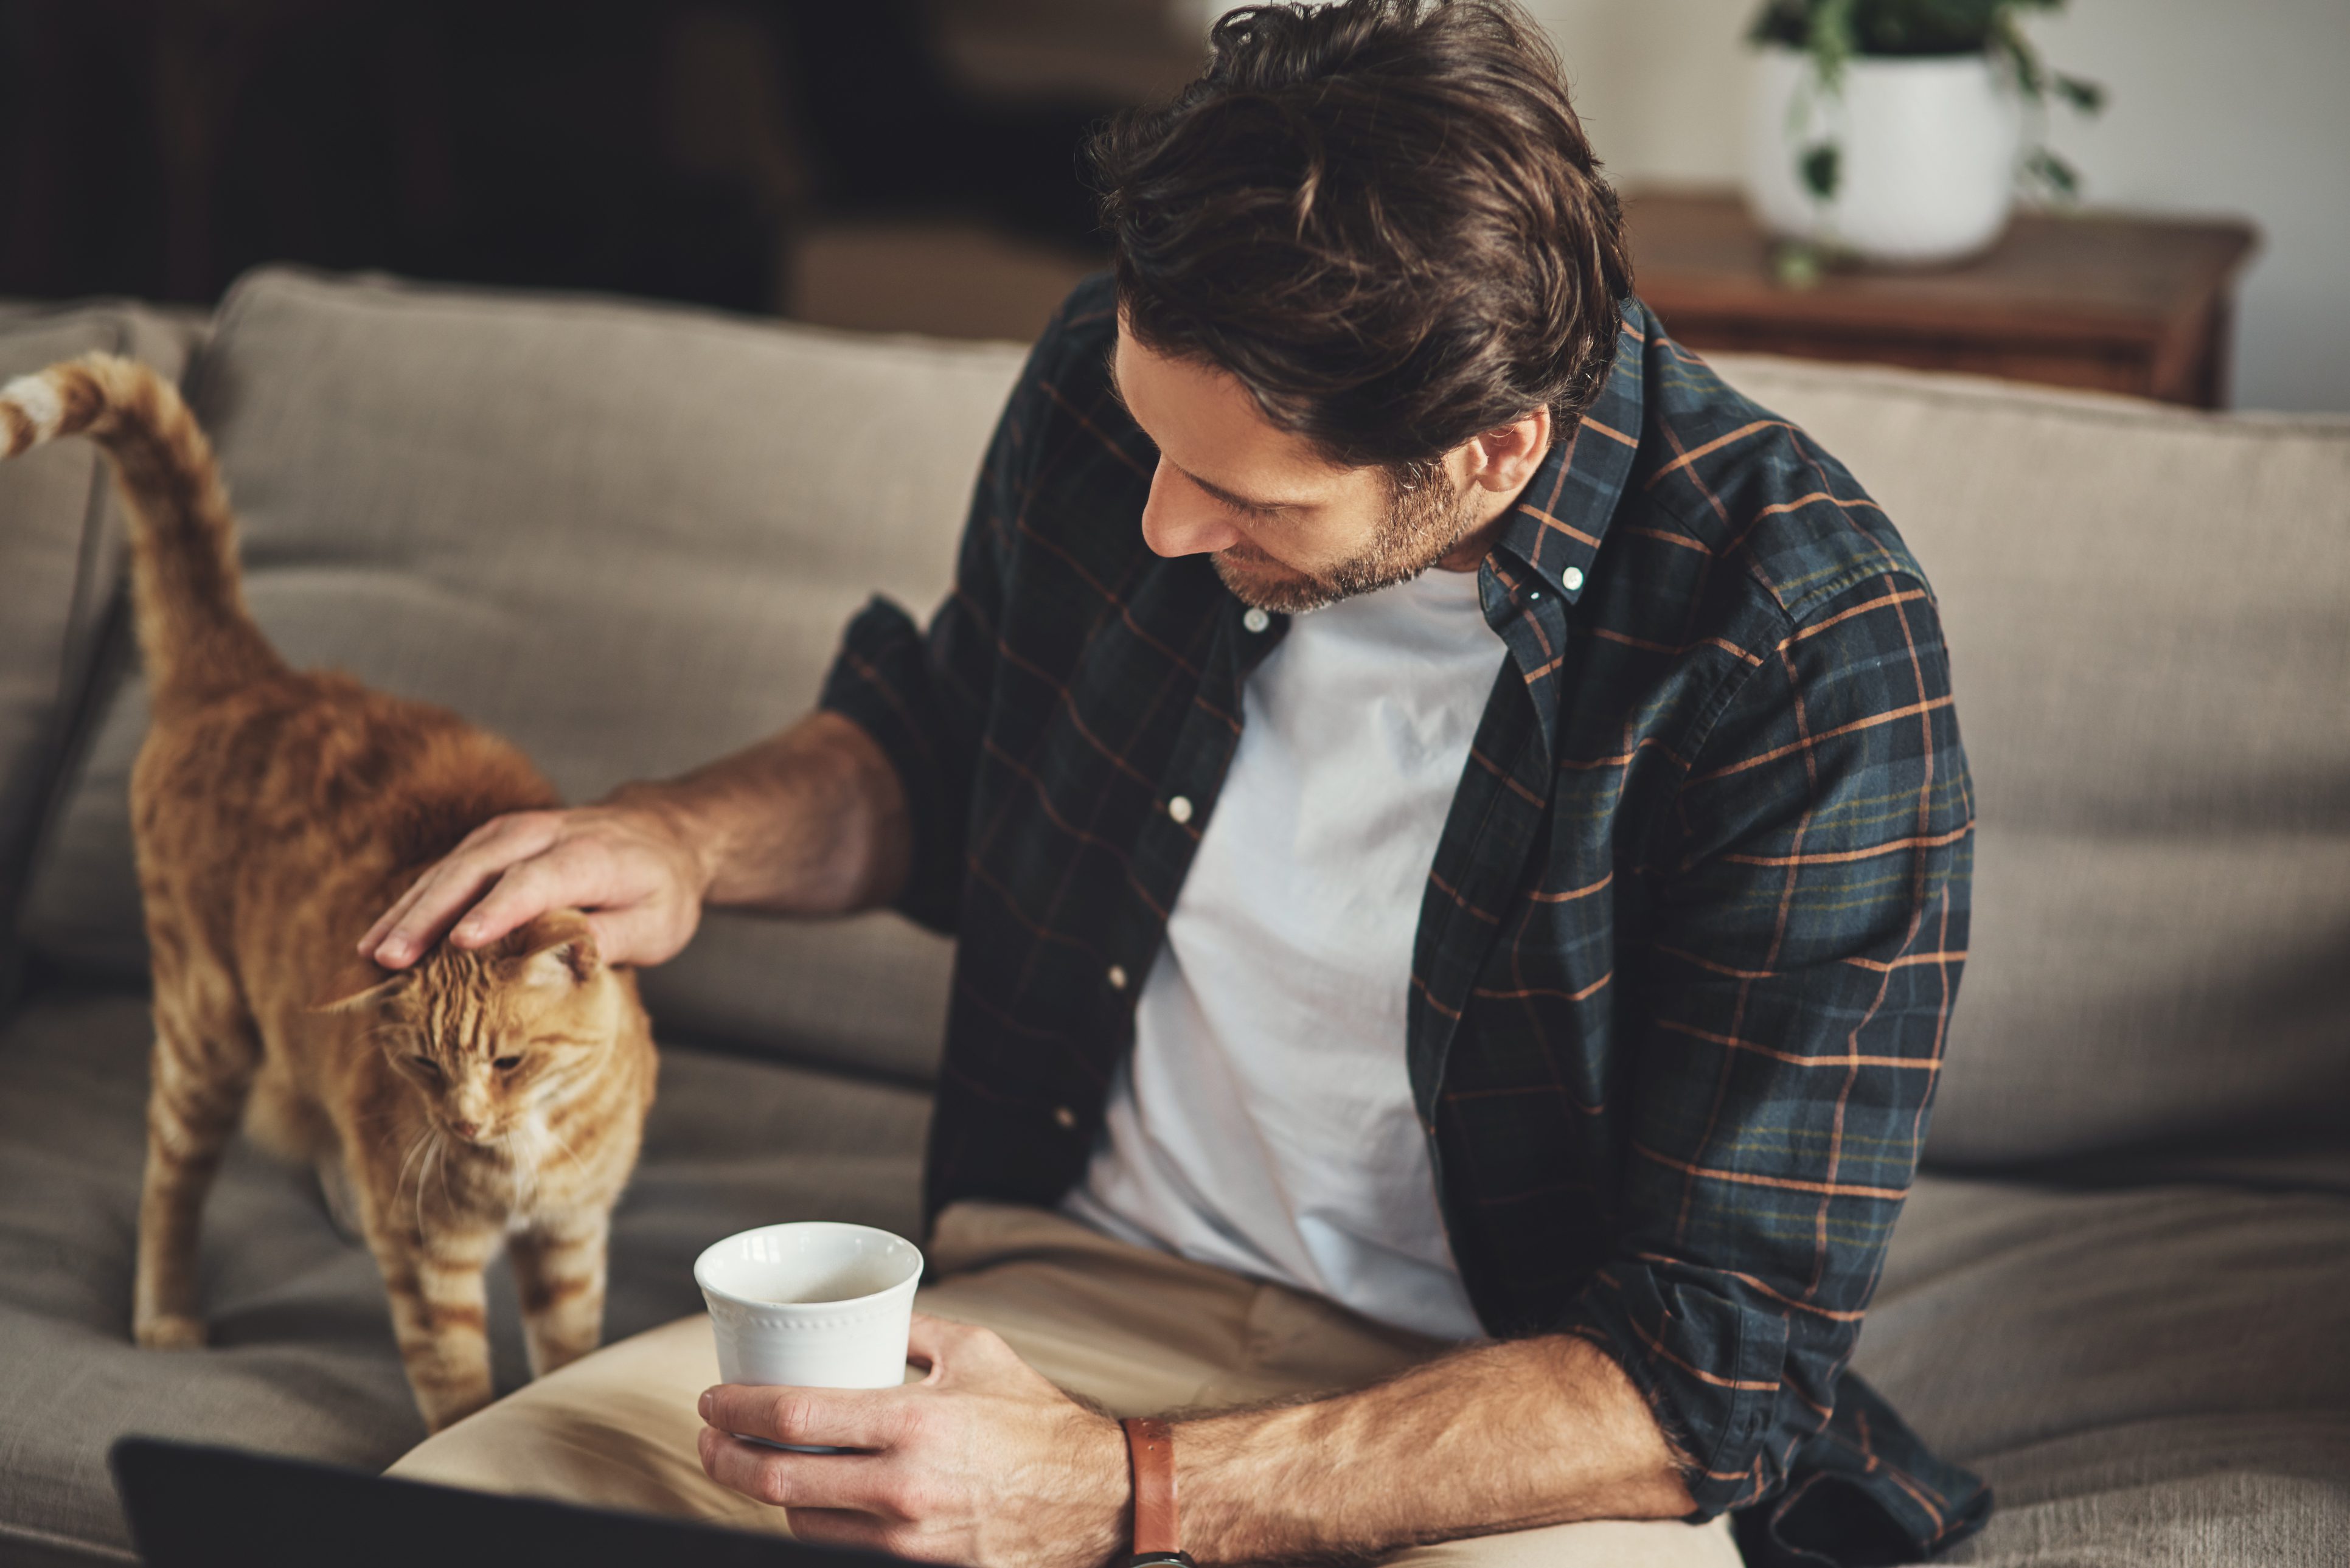 Are Single Men With Cats Less Likely To Find Relationships On Dating Apps?